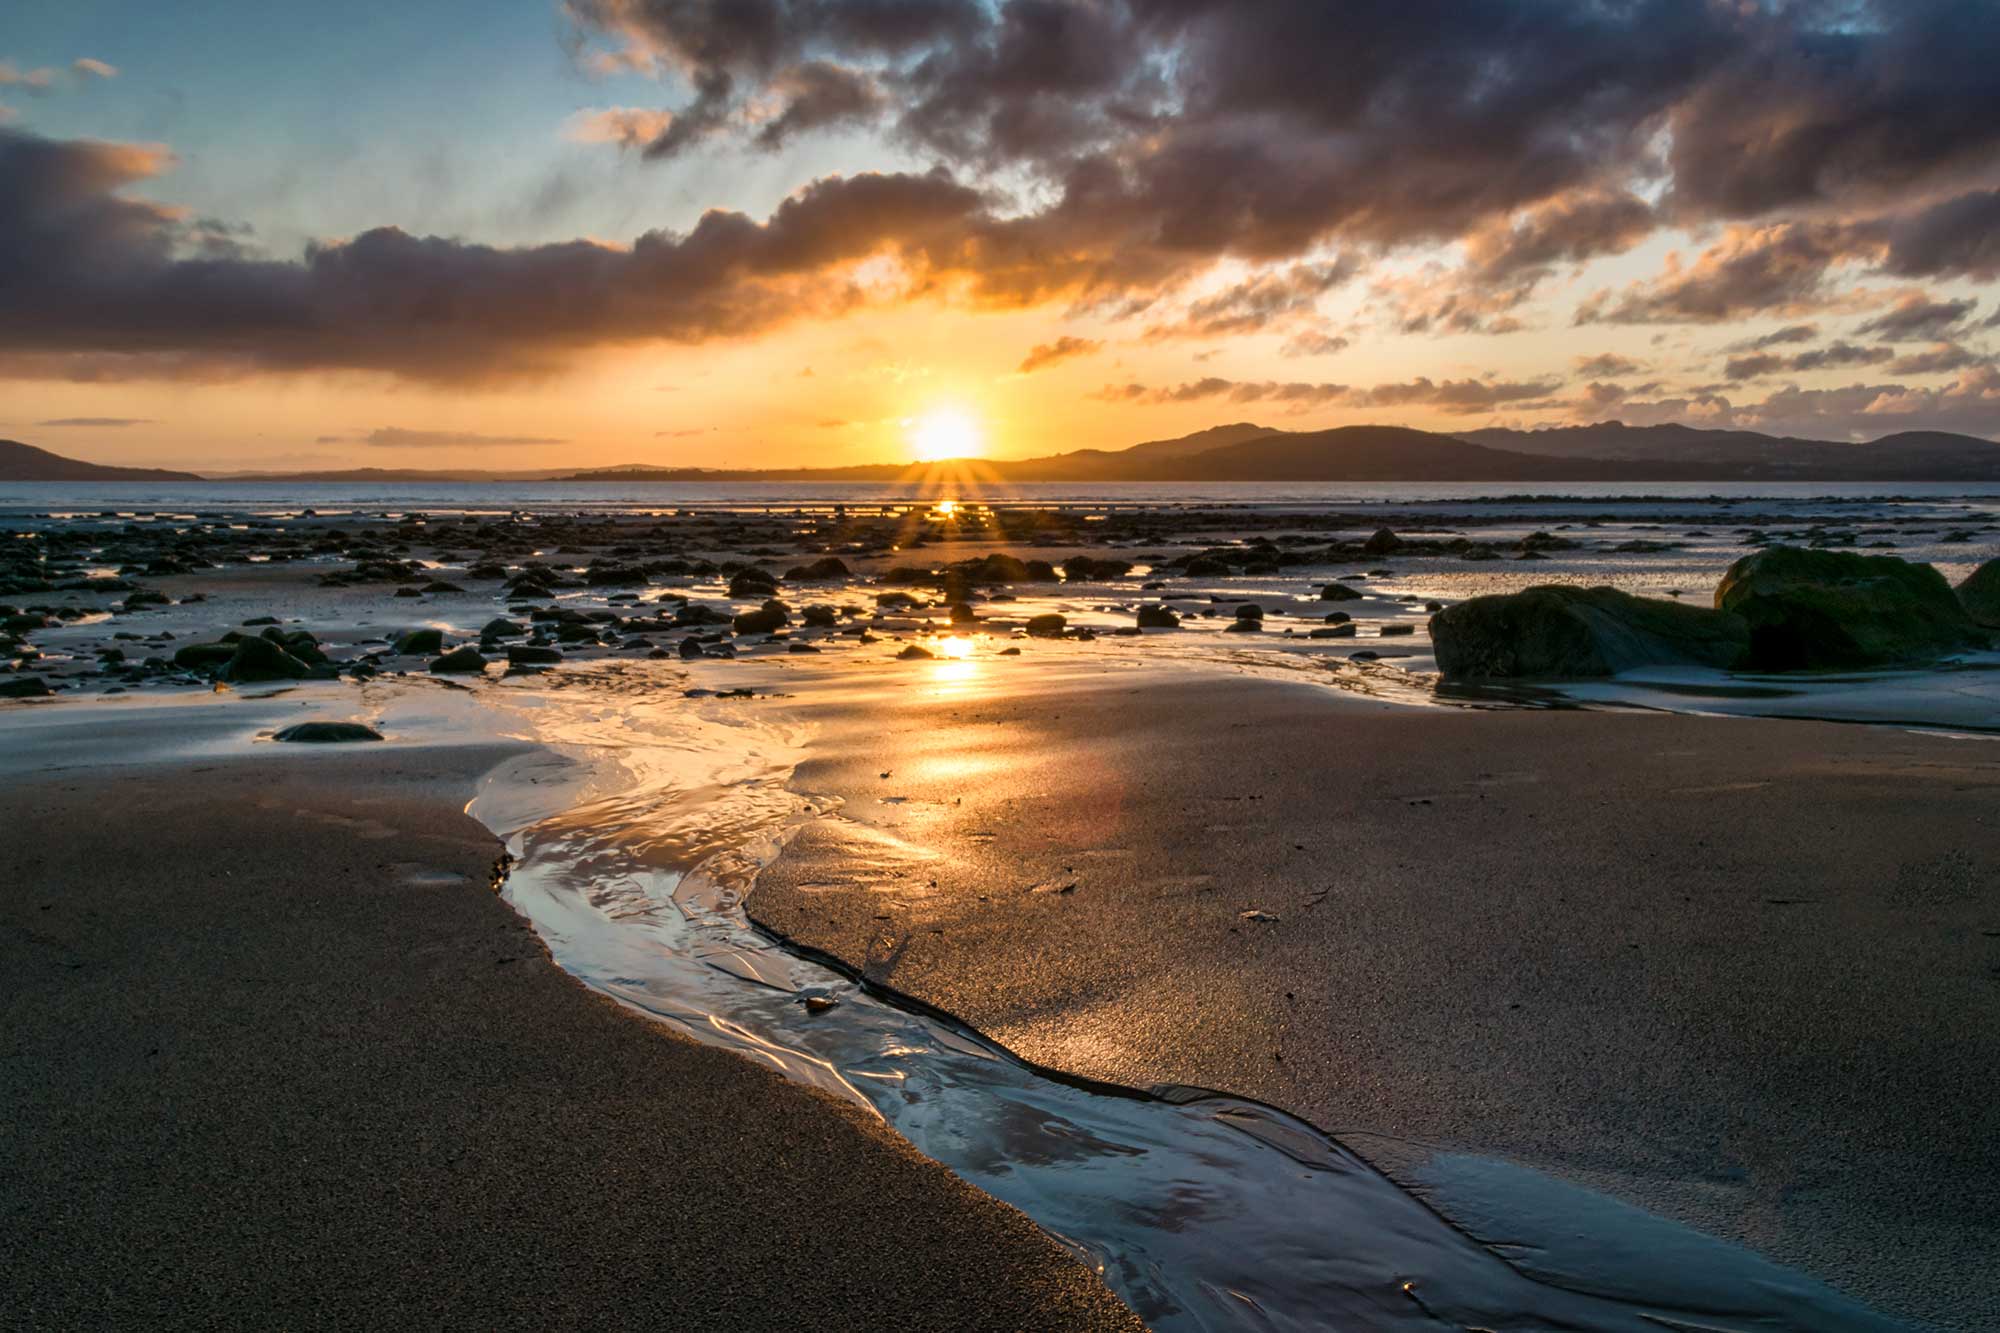 A sunset beach scene in Inishowen, County Donegal